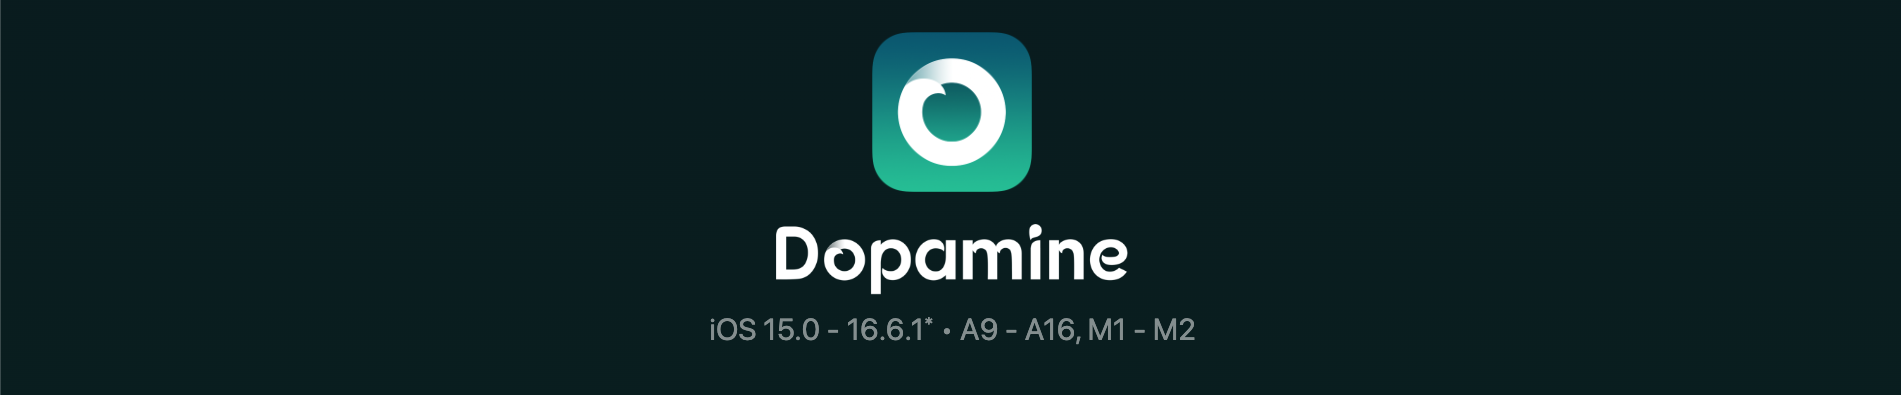 Dopamine 2.0.1 Jailbreak for iOS 16.0 - 16.6.1 Released With Several Bug Fixes